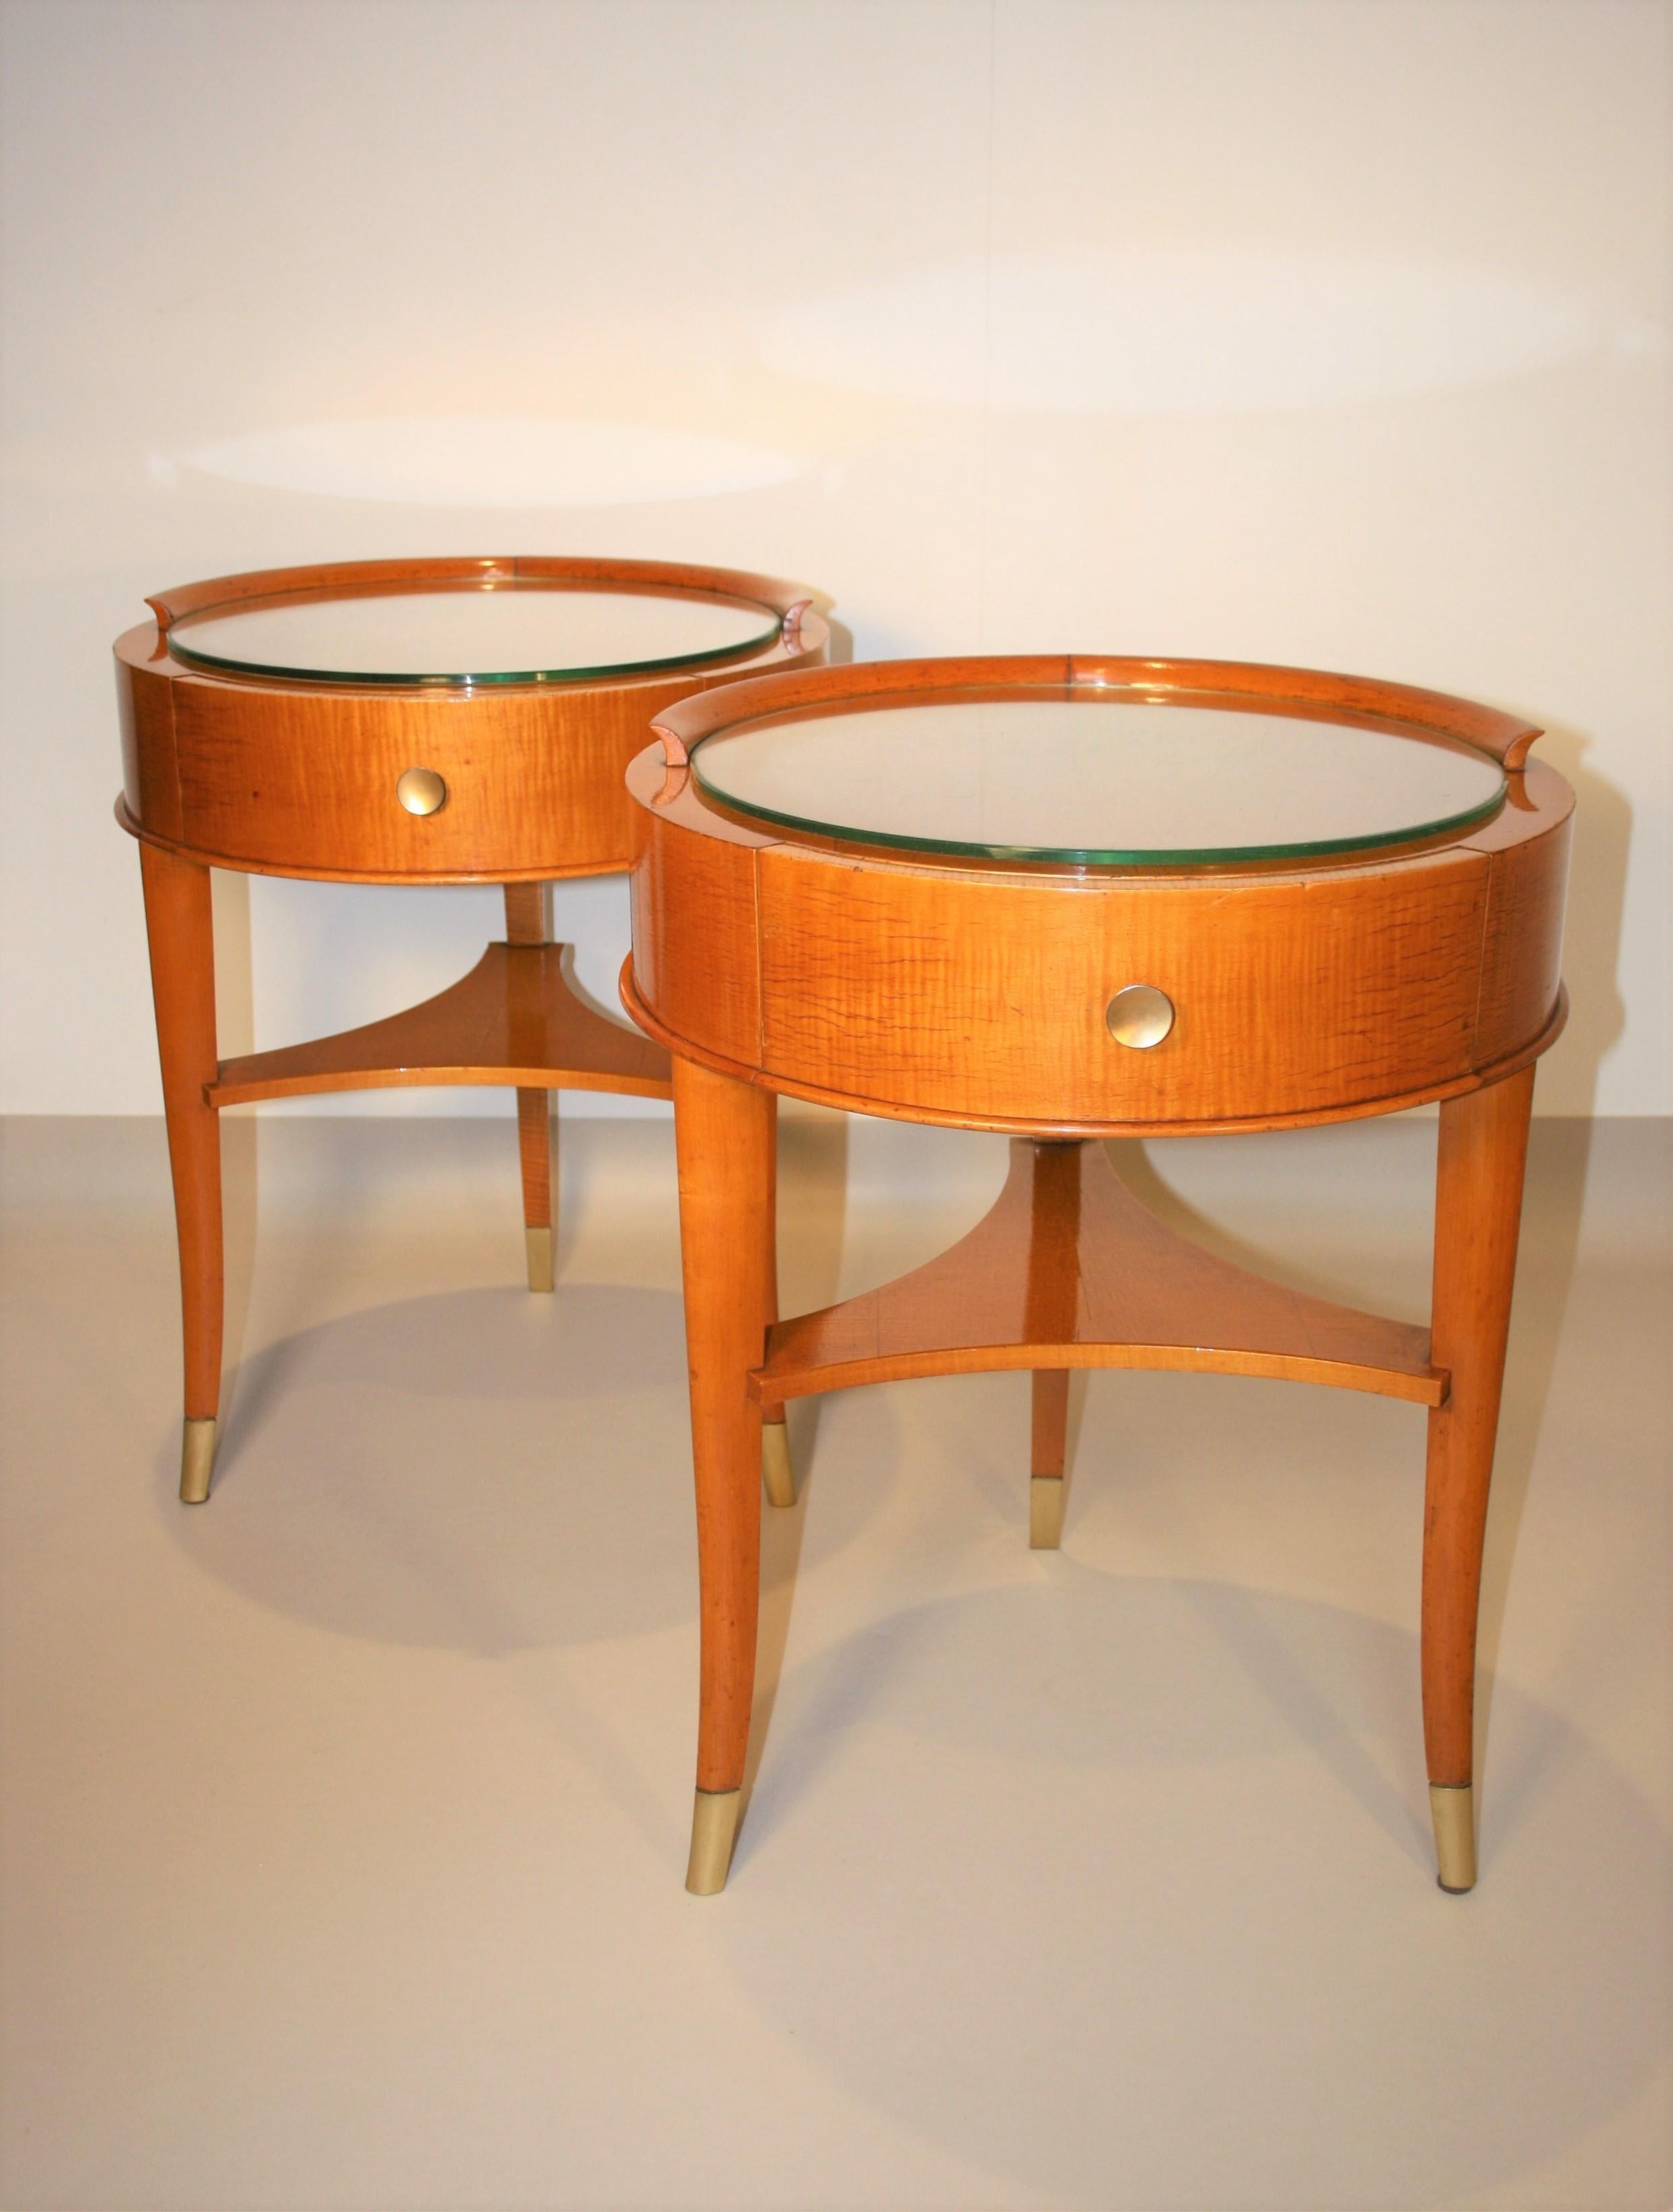 Two beautiful Art Deco side tables made in the 1930s by the well-known firm De Coene in Sycamore.
Both tables are branded with the De Coene logo, the name of the model (Jacqueline) is handwritten and also the name for which the tables were made (Mr